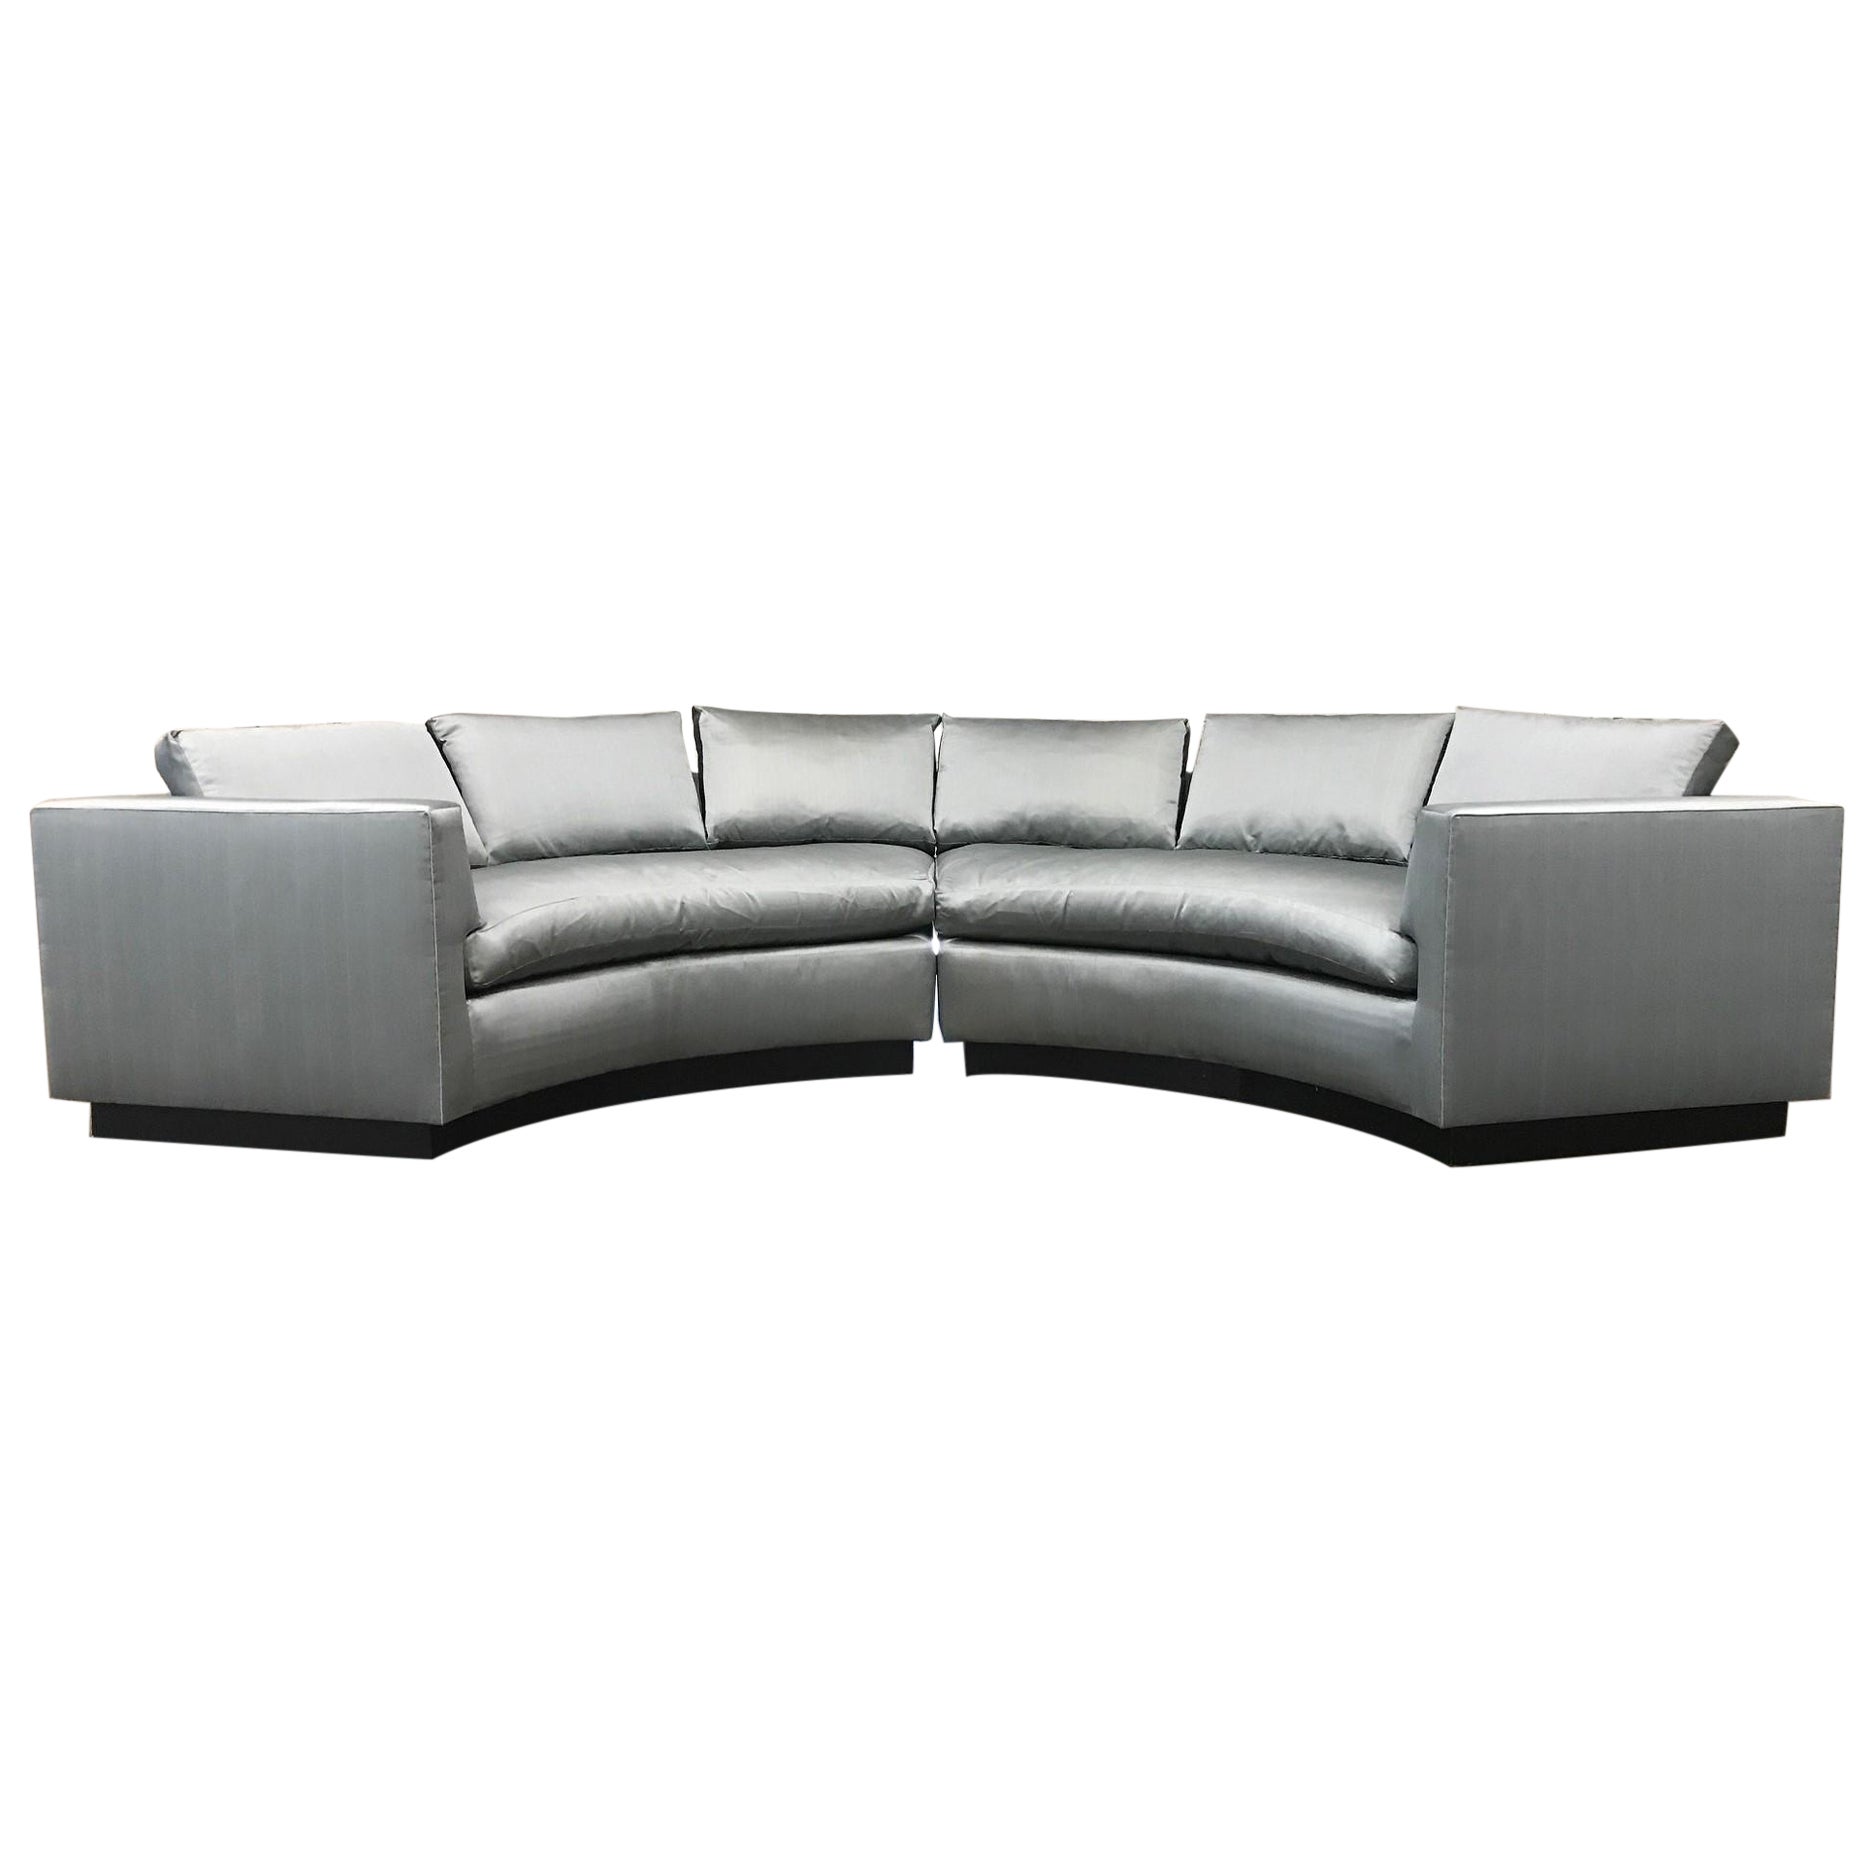 Two-Piece Sofa Sectional in Satin